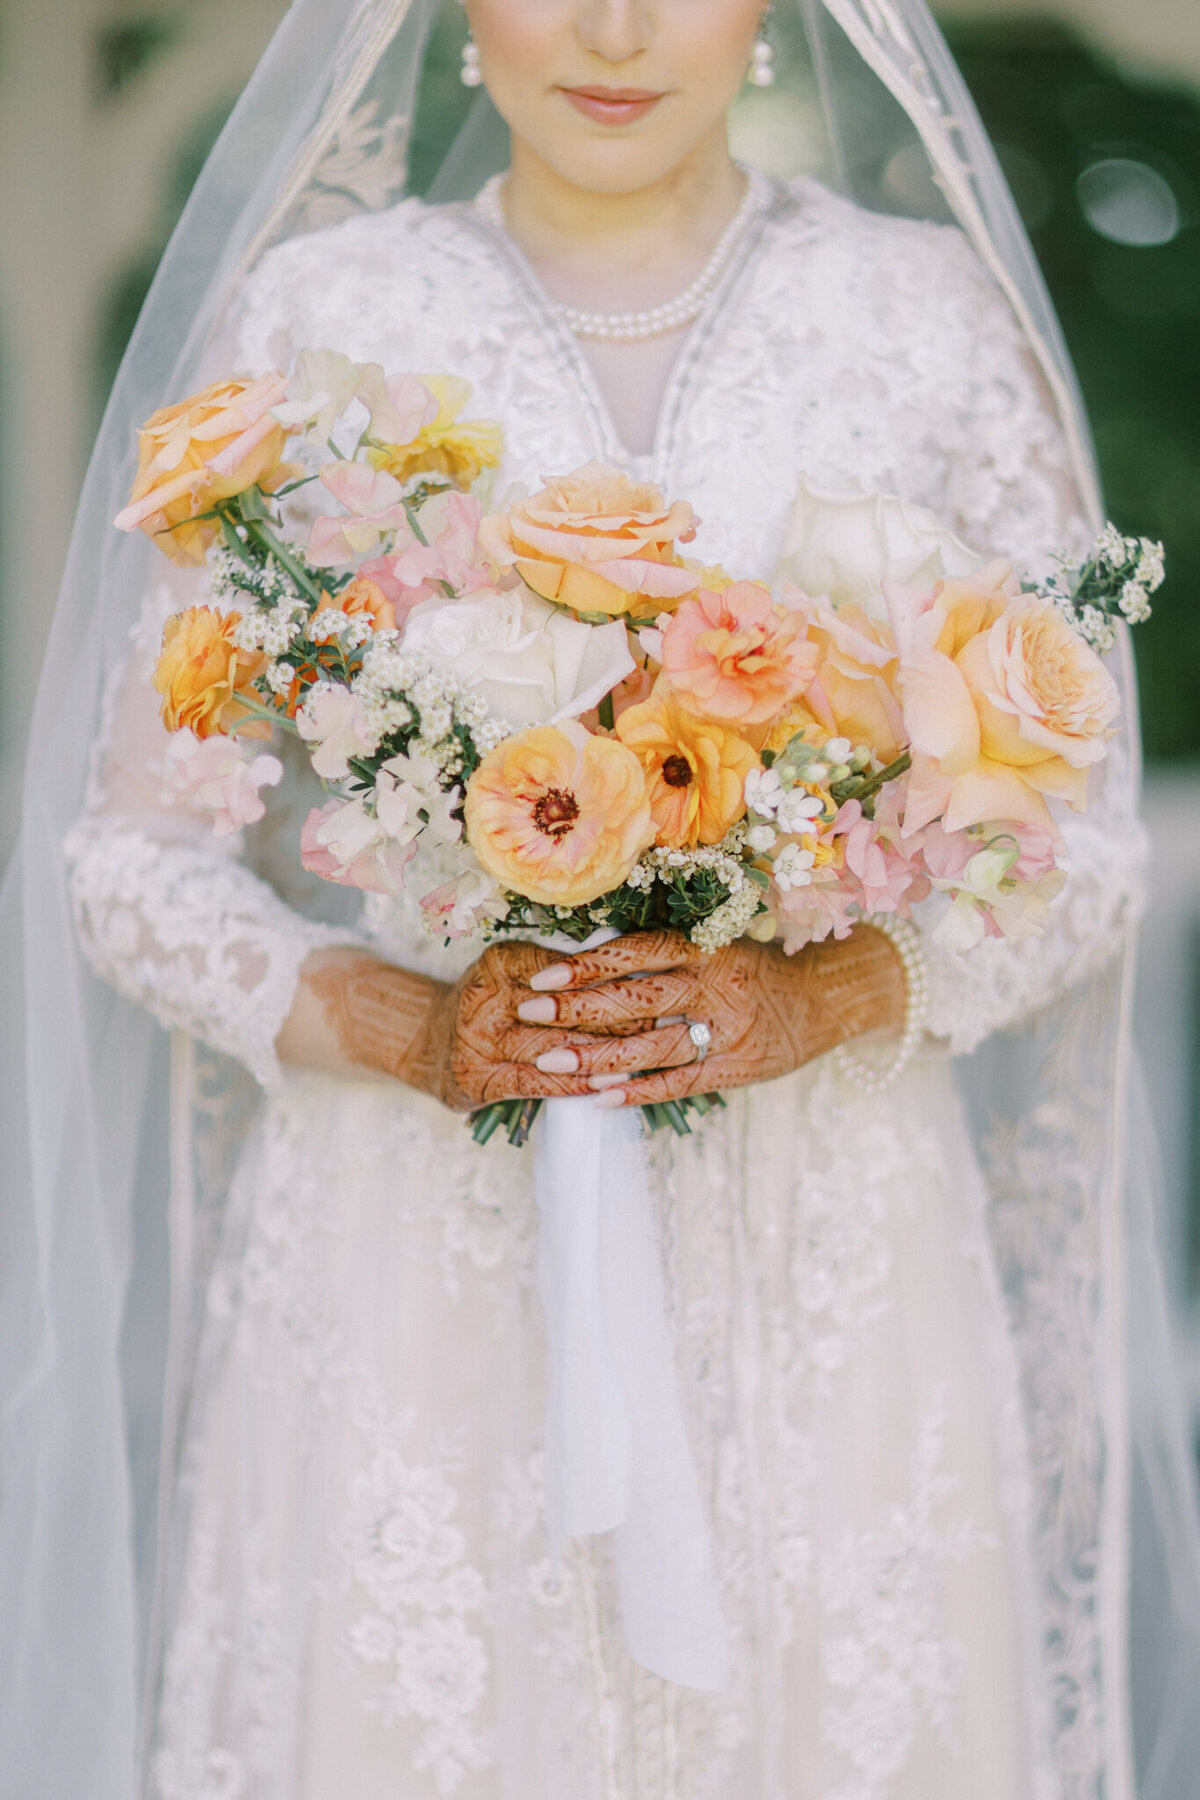 Peach and white, spring-inspired bridal bouquet by The Romantiks, romantic wedding florals based in Calgary, AB & Cranbrook, BC. Featured on the Brontë Bride Vendor Guide.